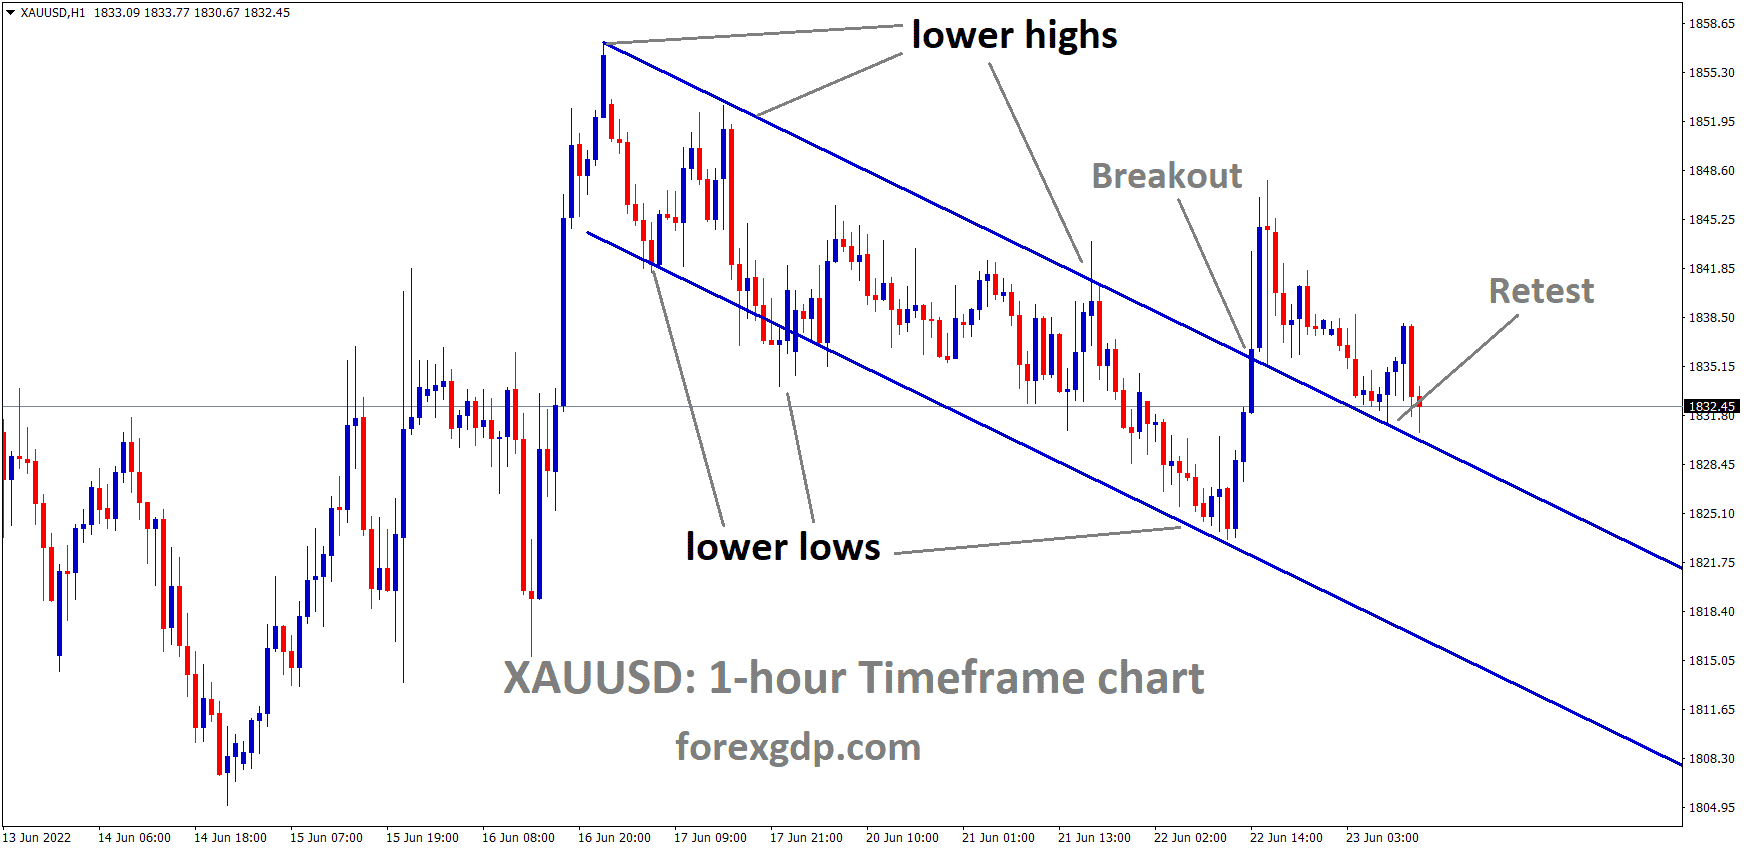 XAUUSD Gold price has broken the Descending channel and the market has retested the broken area of the channel.